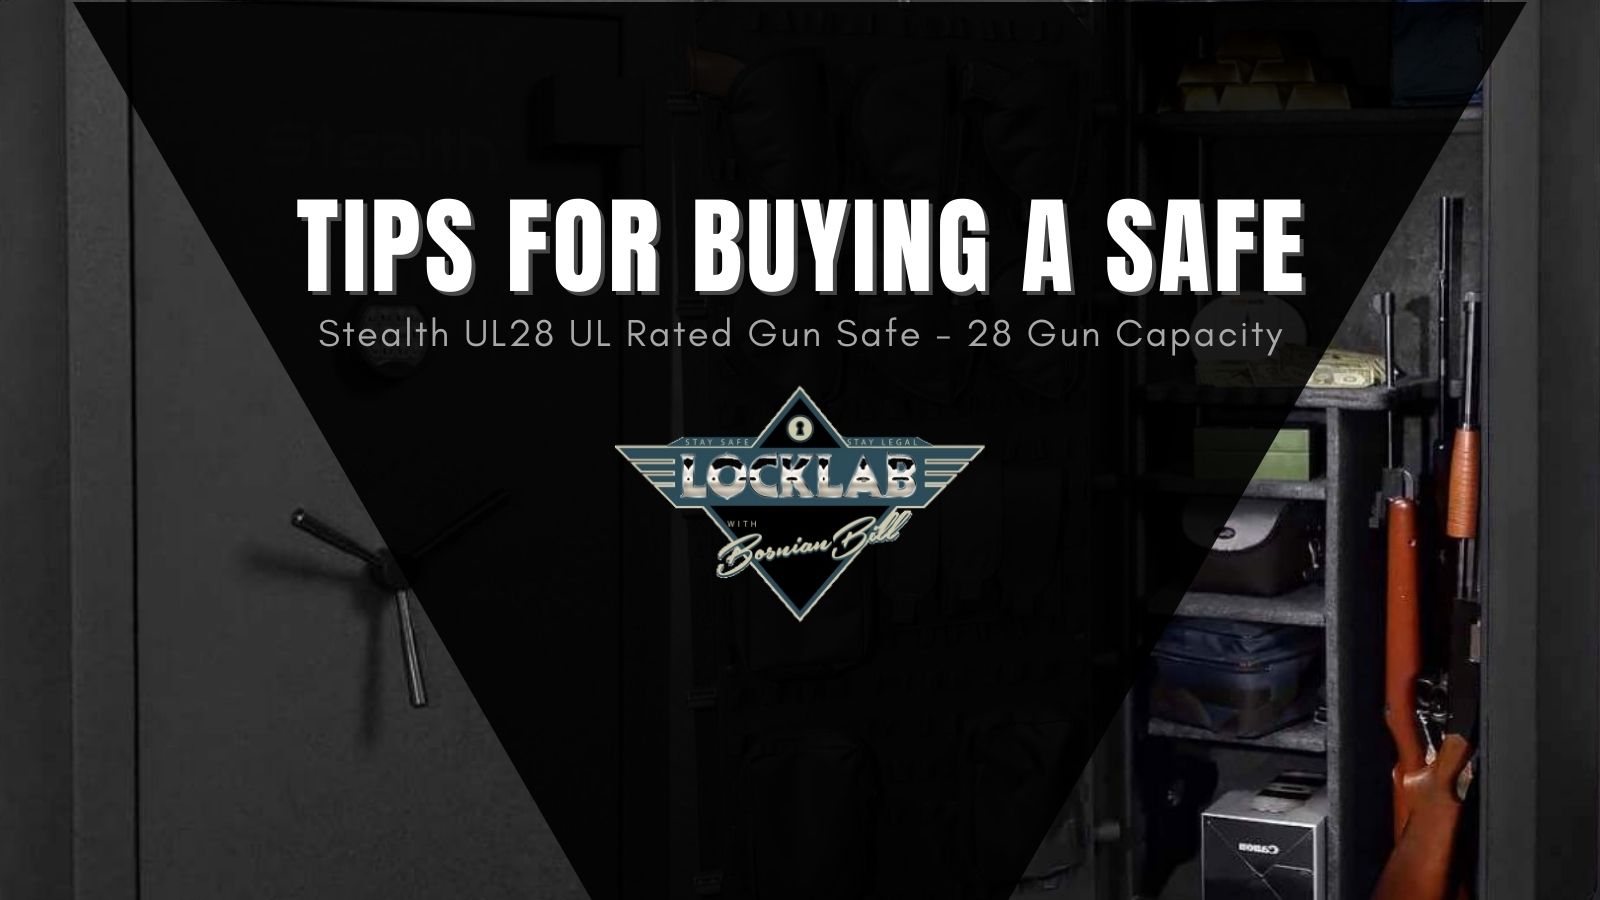 Tips for Buying a Safe: Stealth UL28